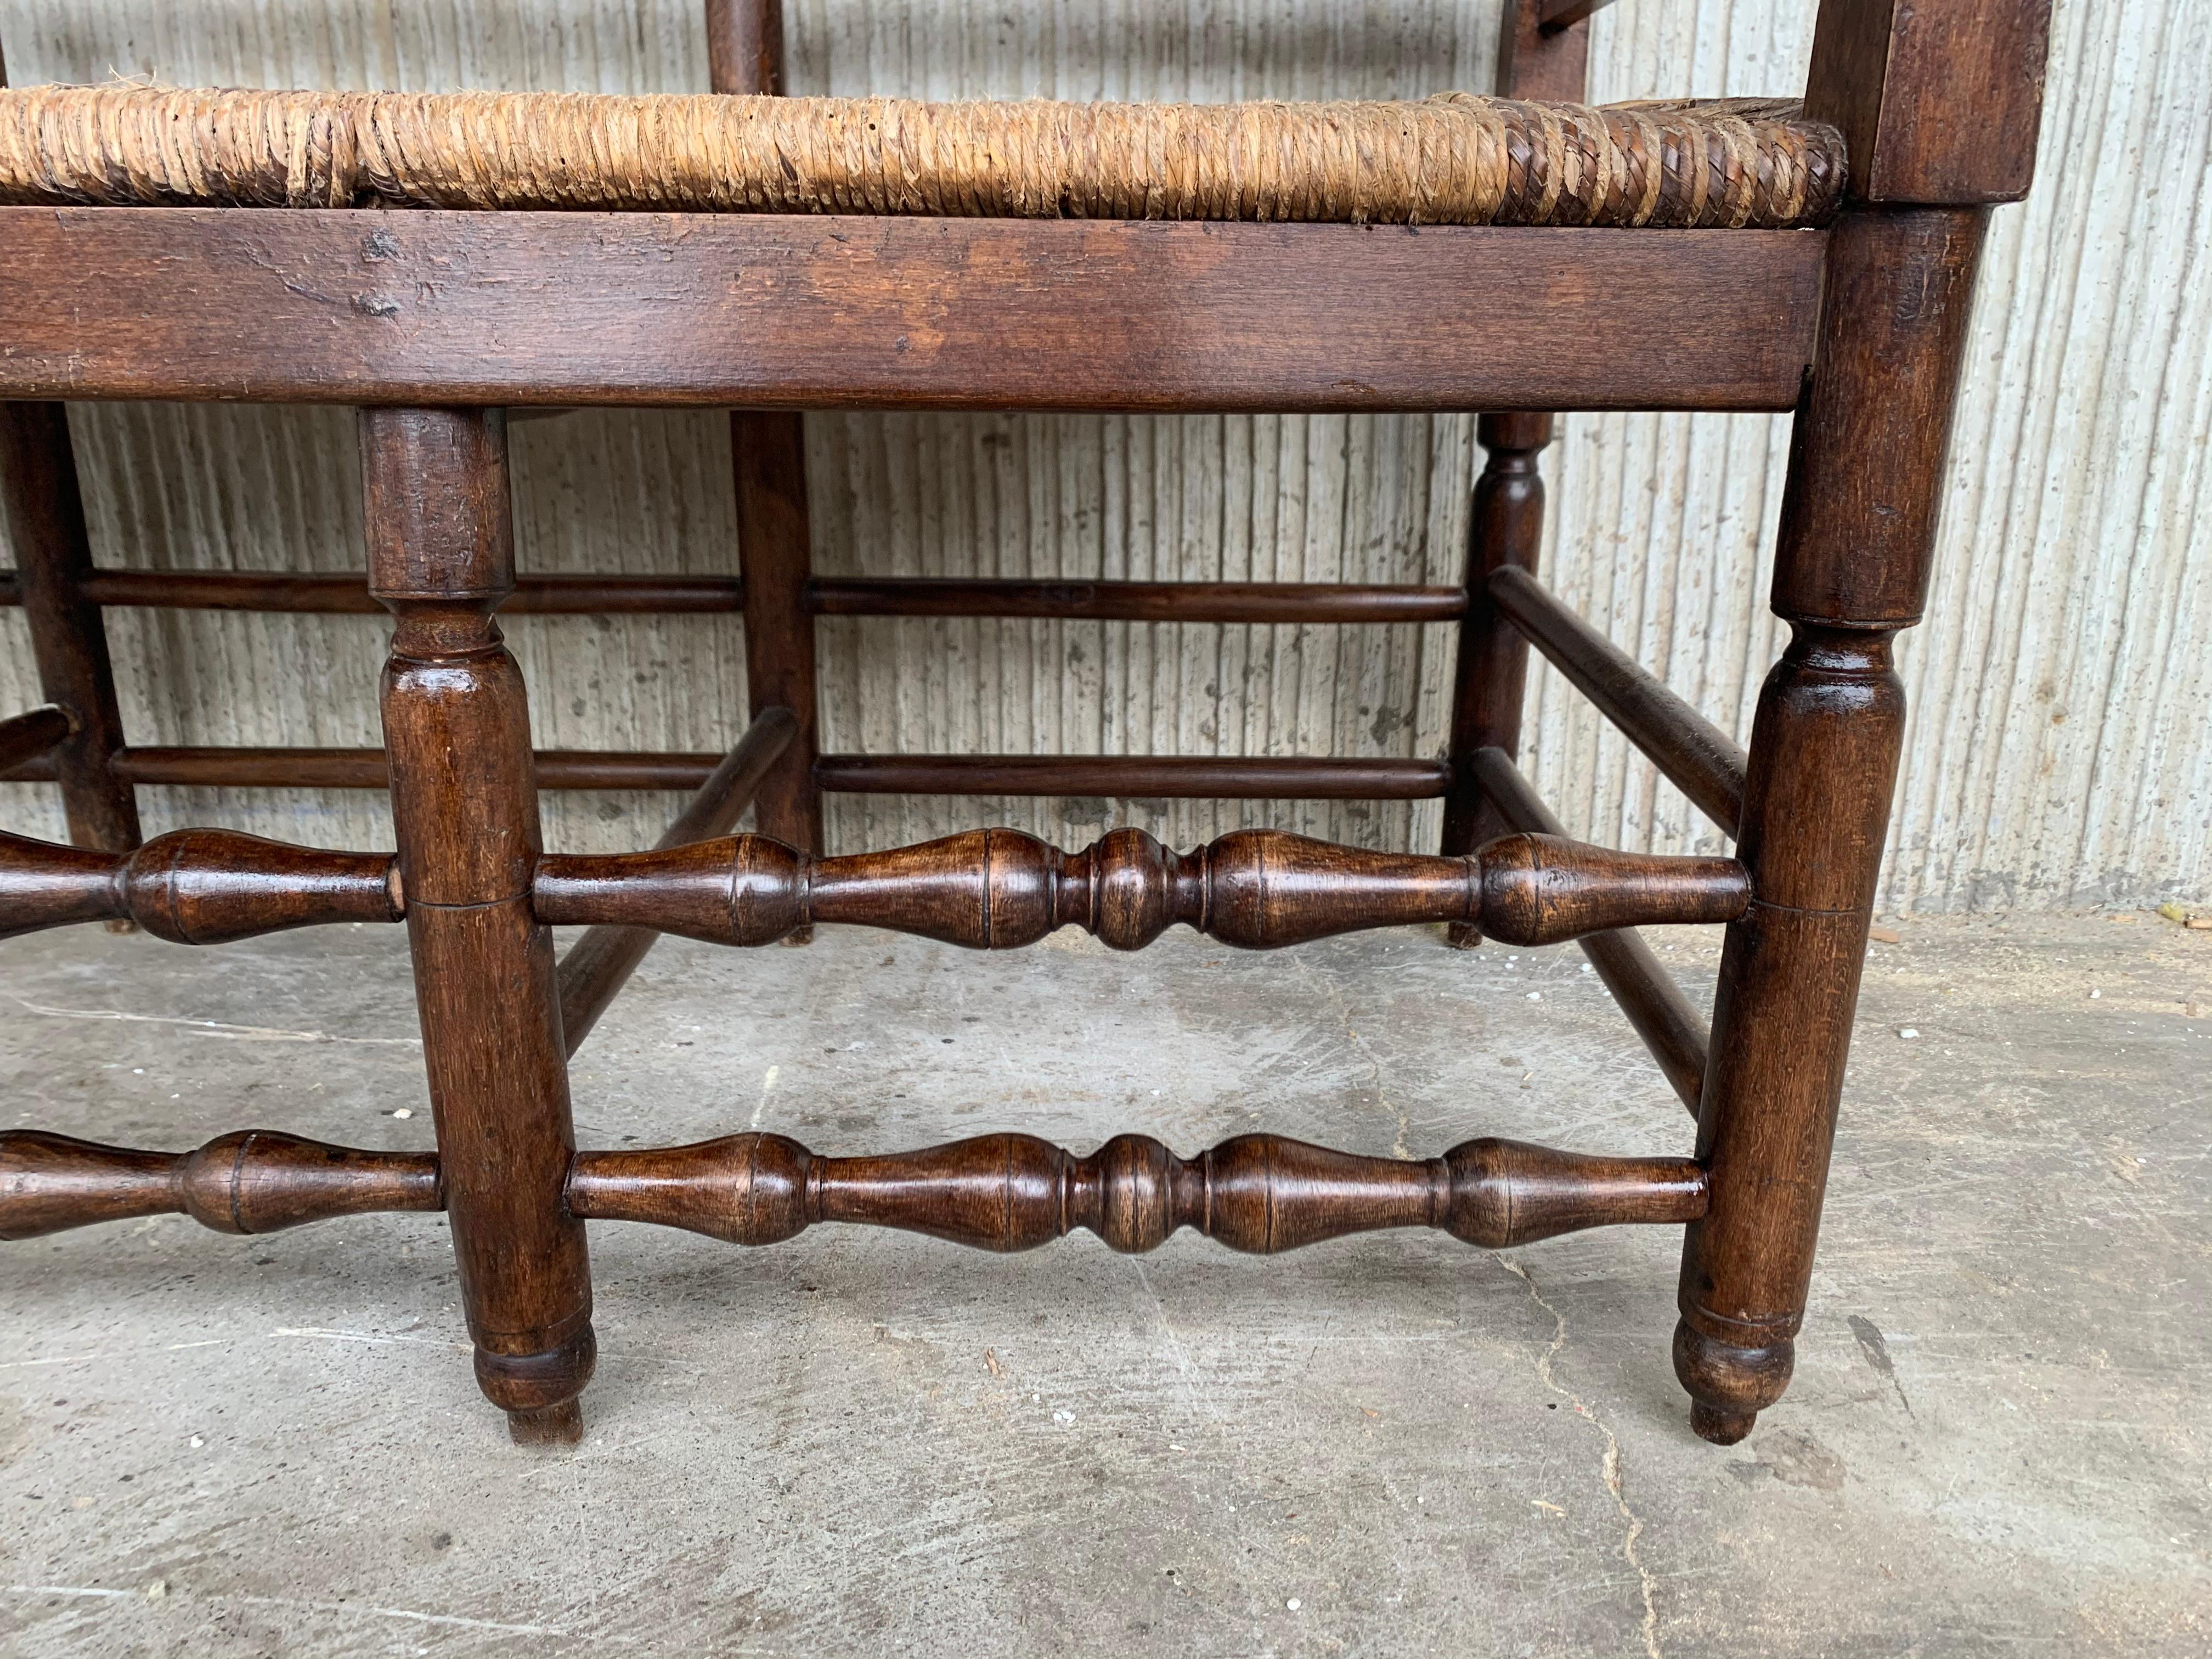 19th Century 20th Century Catalan Bench in Walnut with Caned Seat For Sale